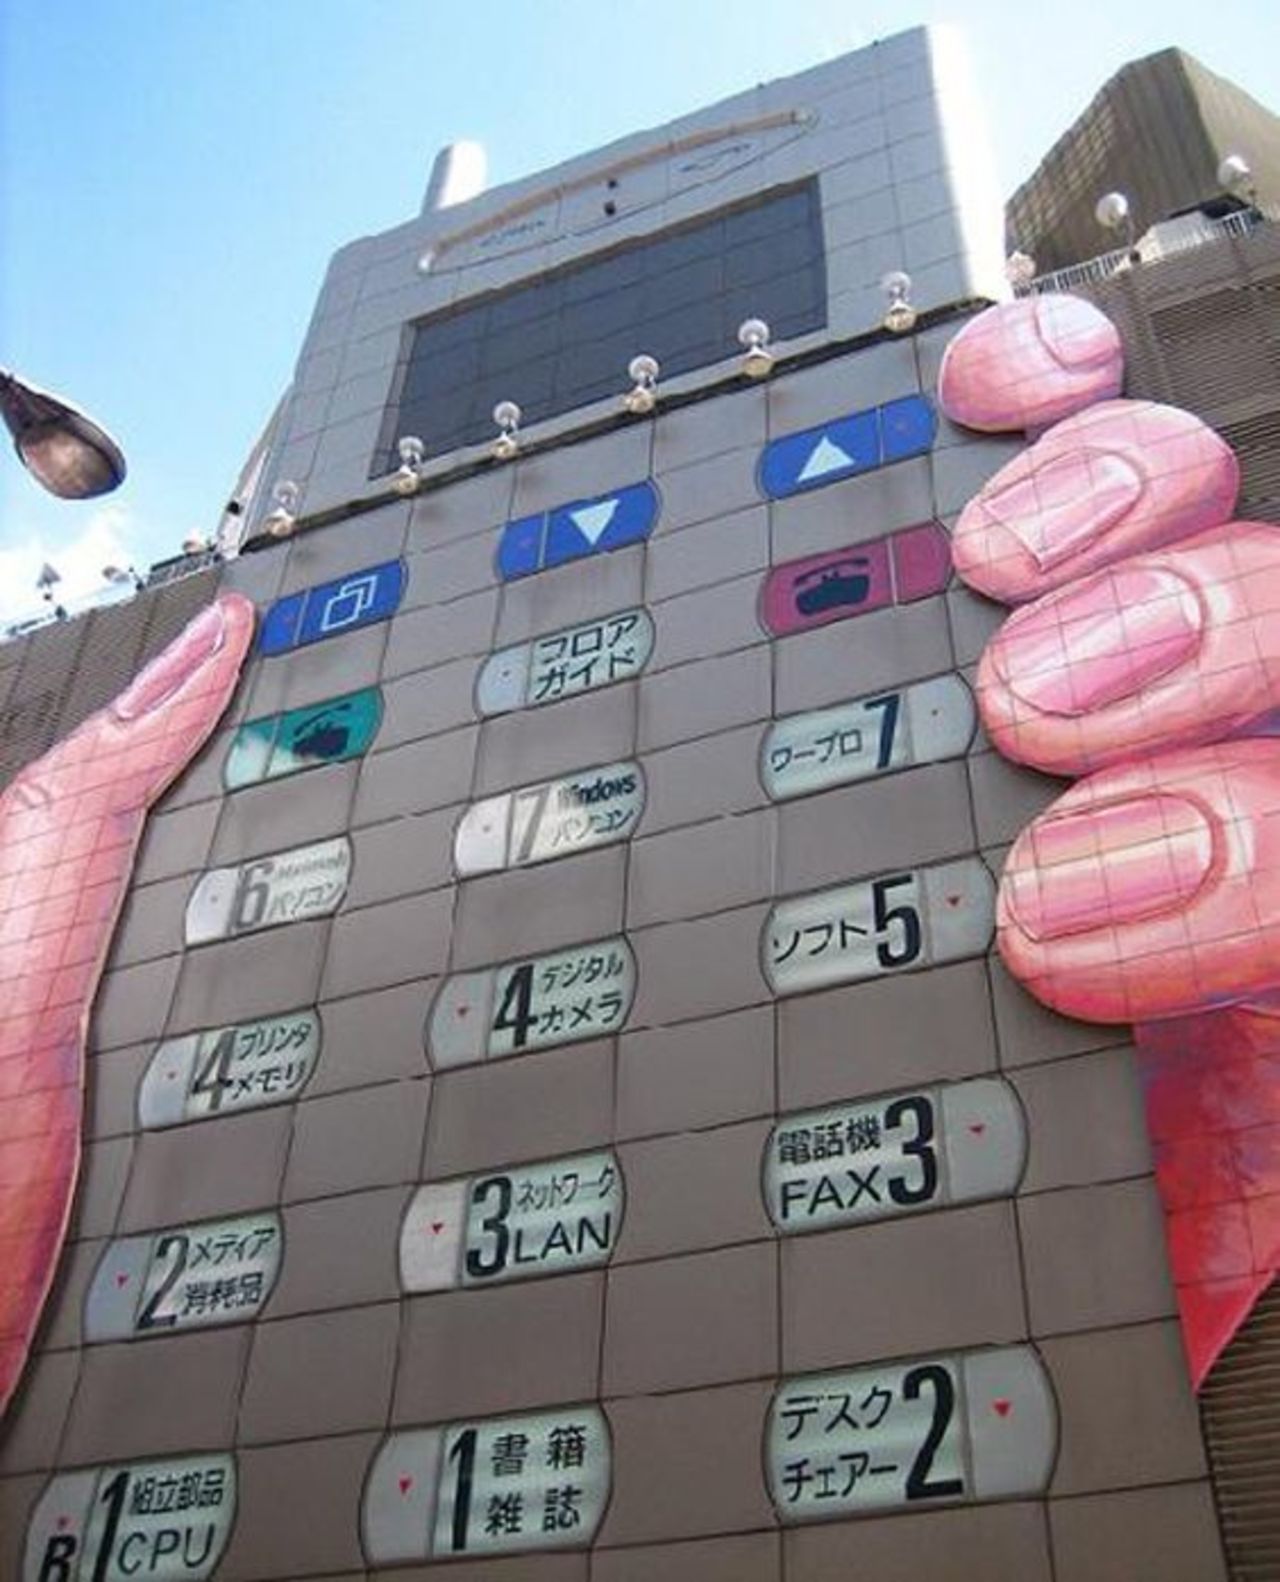 Japanese street #art turns a building into a mobile phone https://t.co/Dm6VljK1YL